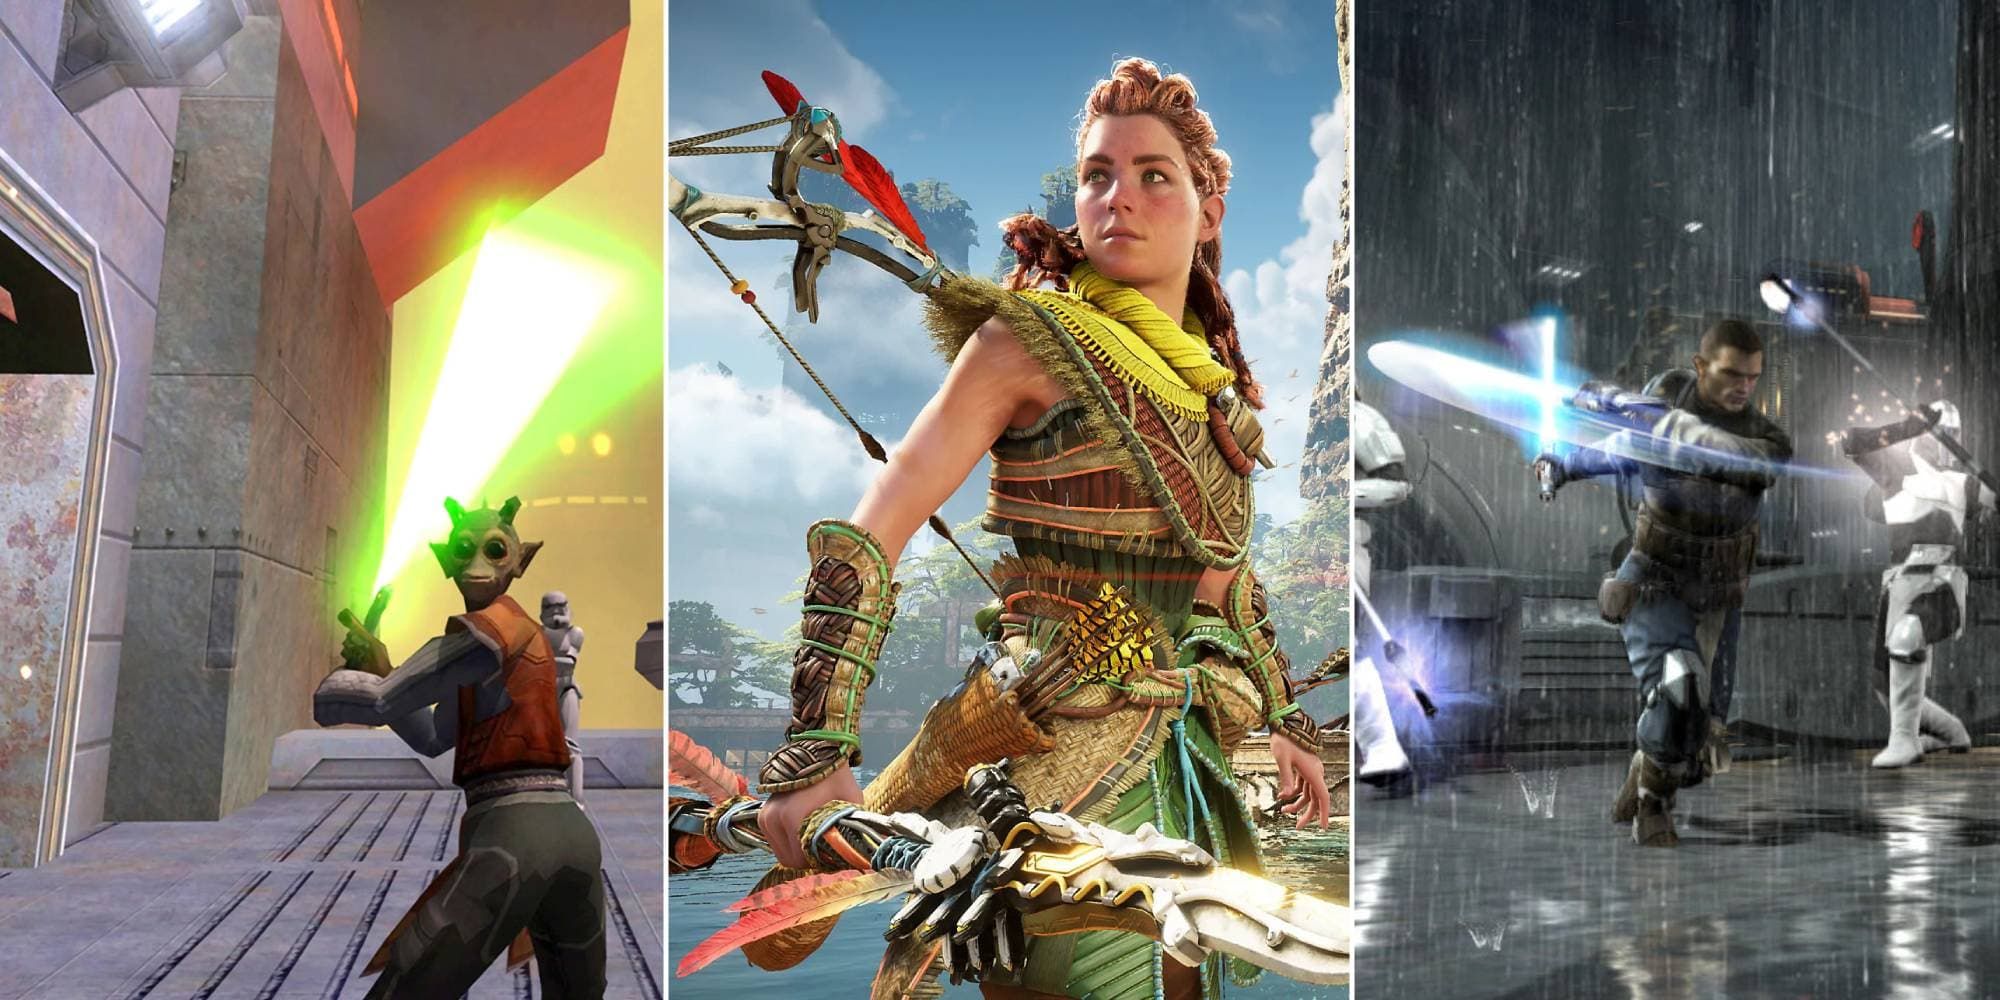 A Rodian Jedi wields a green lightsaber, Aloy stands near a body of water with her bow, and Starkiller strikes his enemies with his lightsaber.